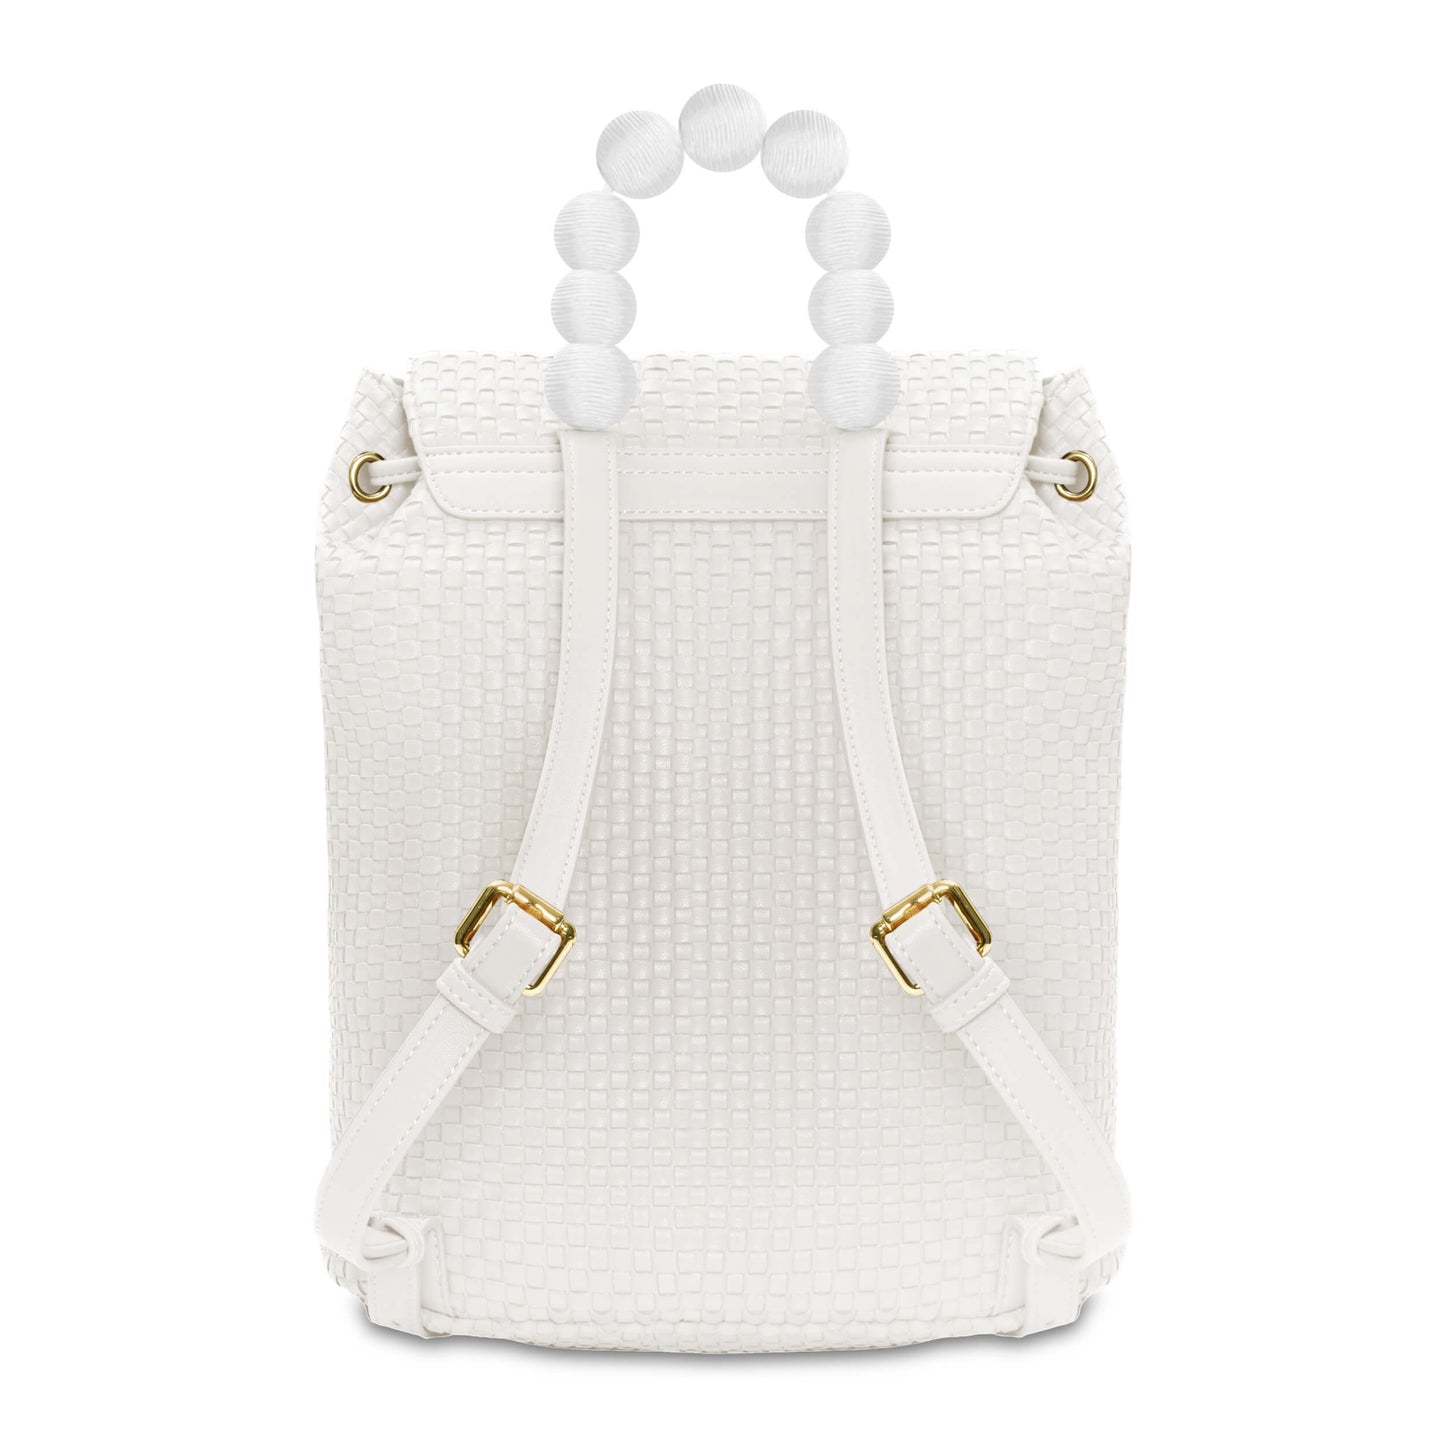 The Jael Backpack - Peaceful White (Customizable)